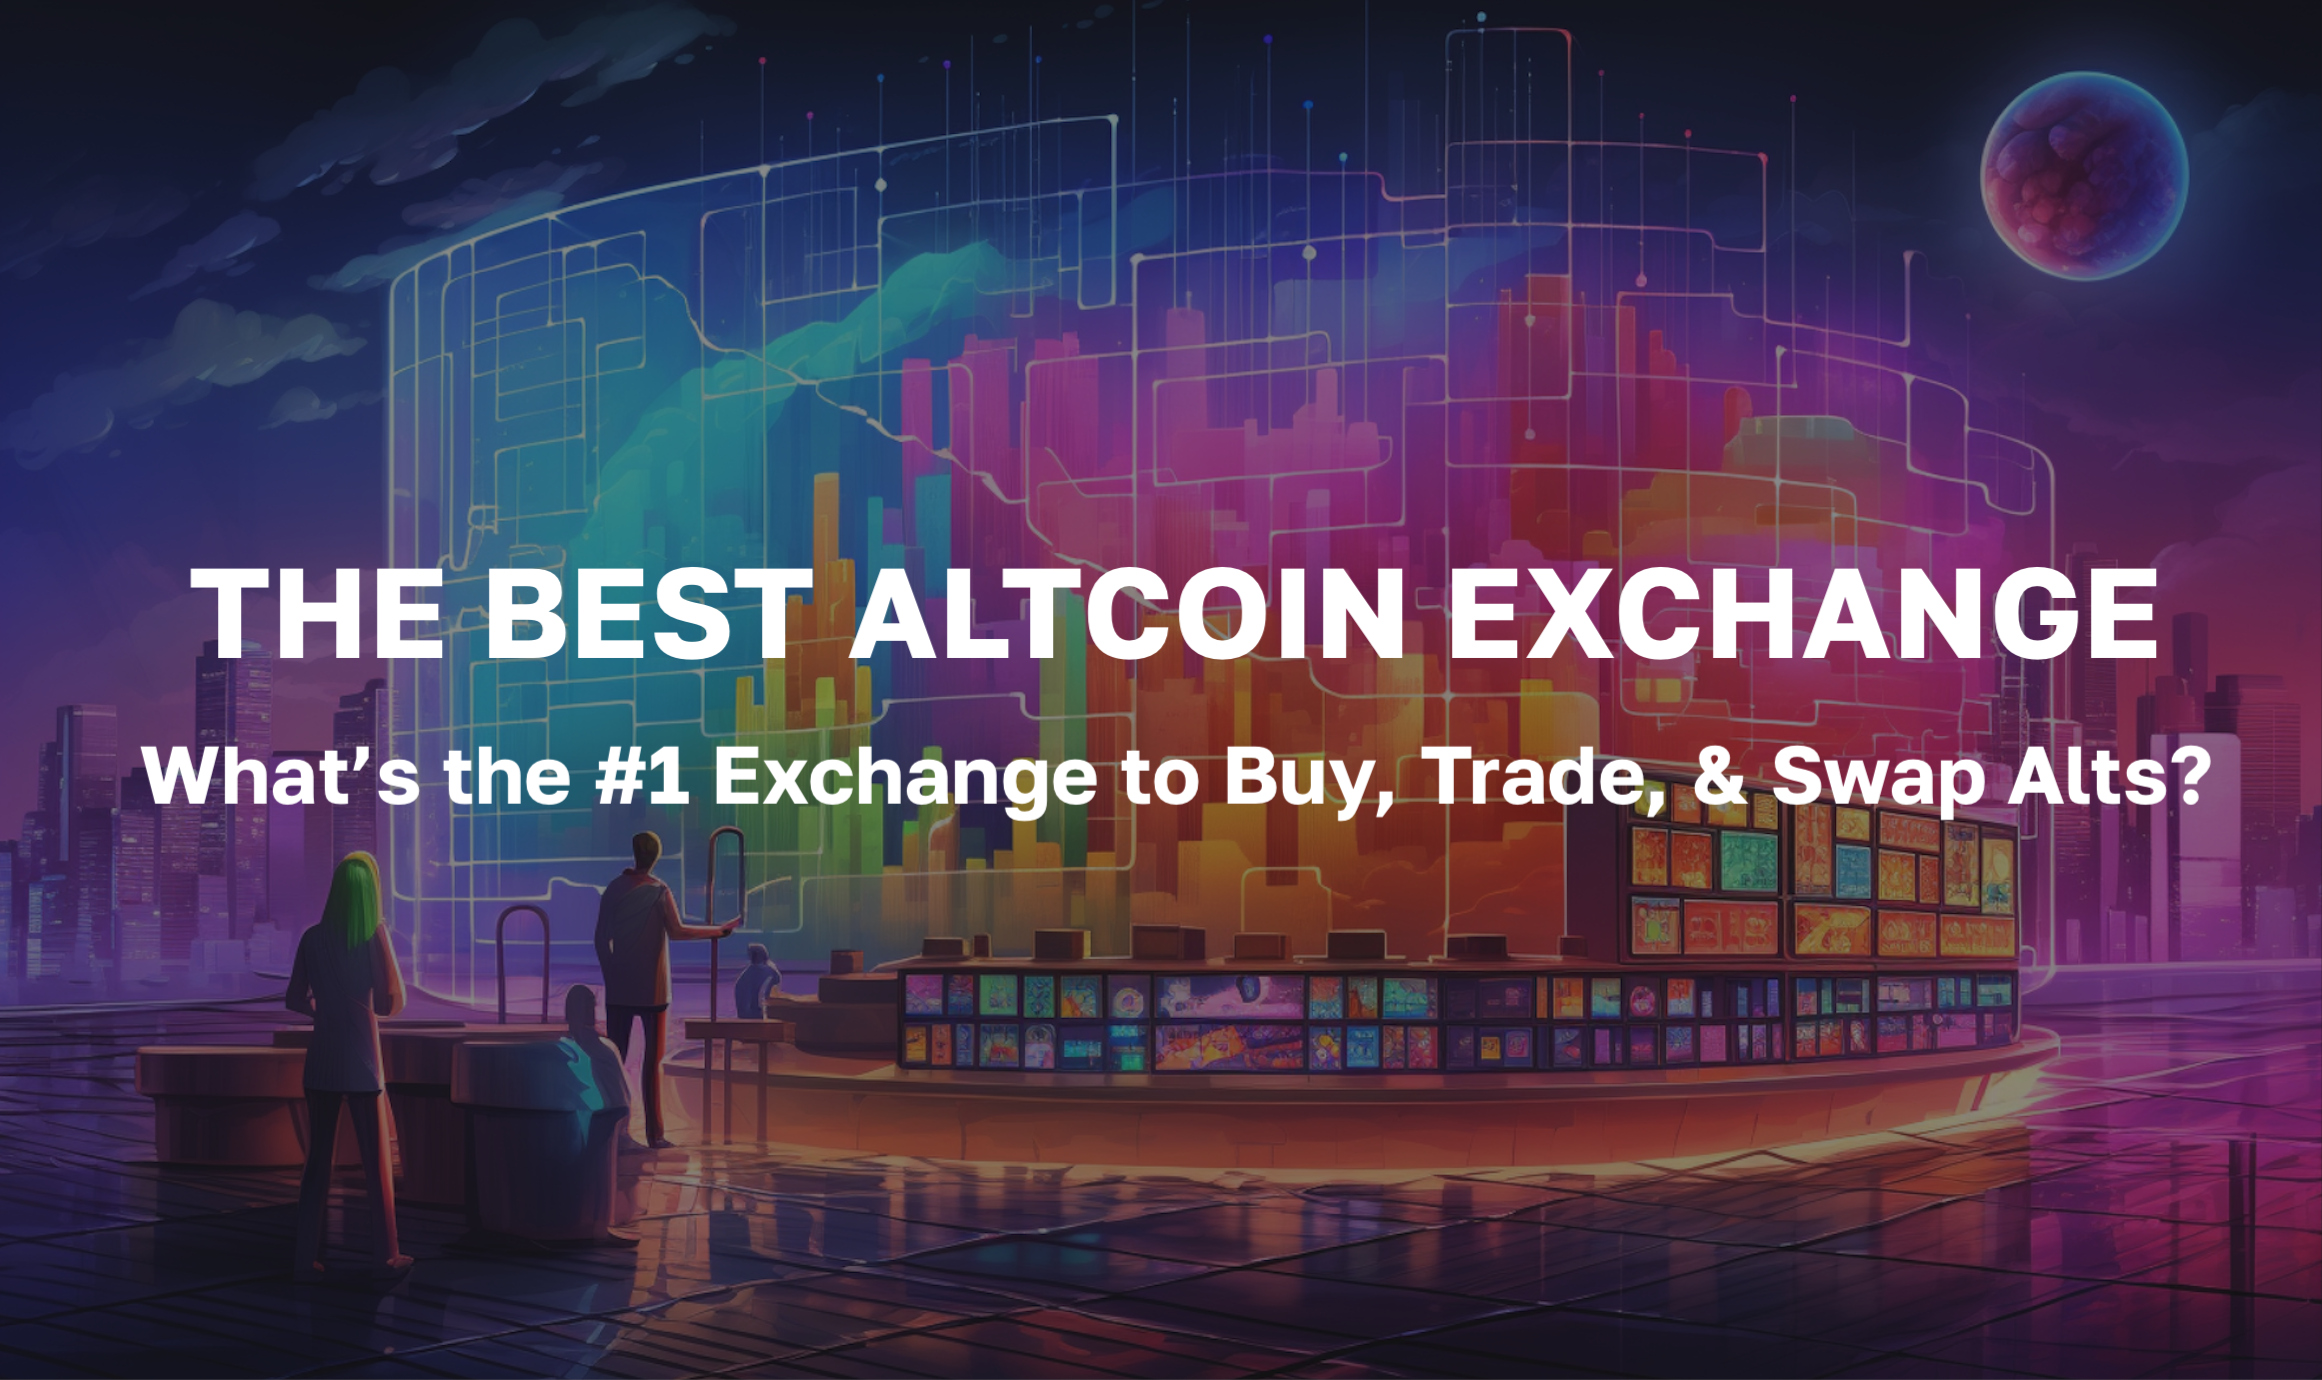 What is the Best Altcoin Exchange to Buy, Trade, and Swap Alts